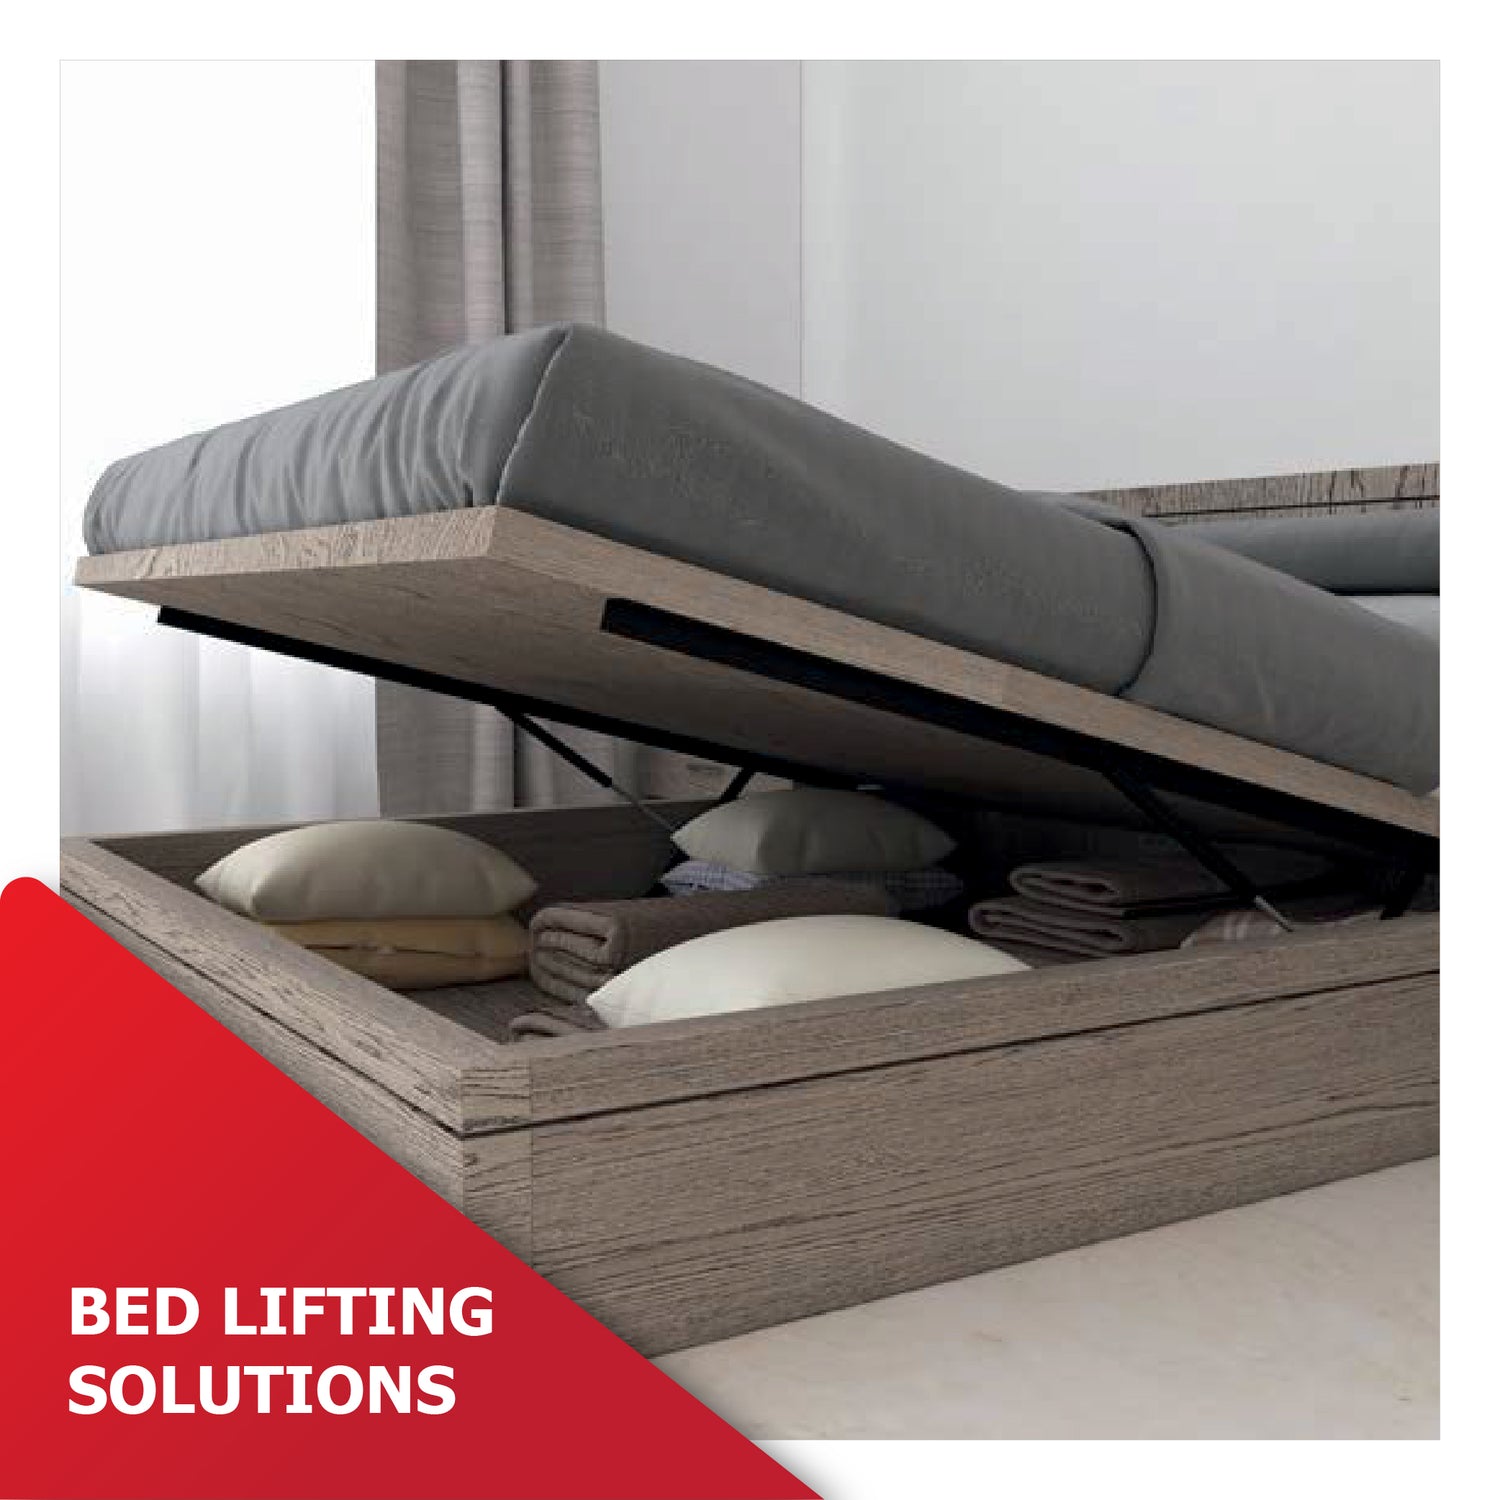 Bed Lifting Solutions | Category